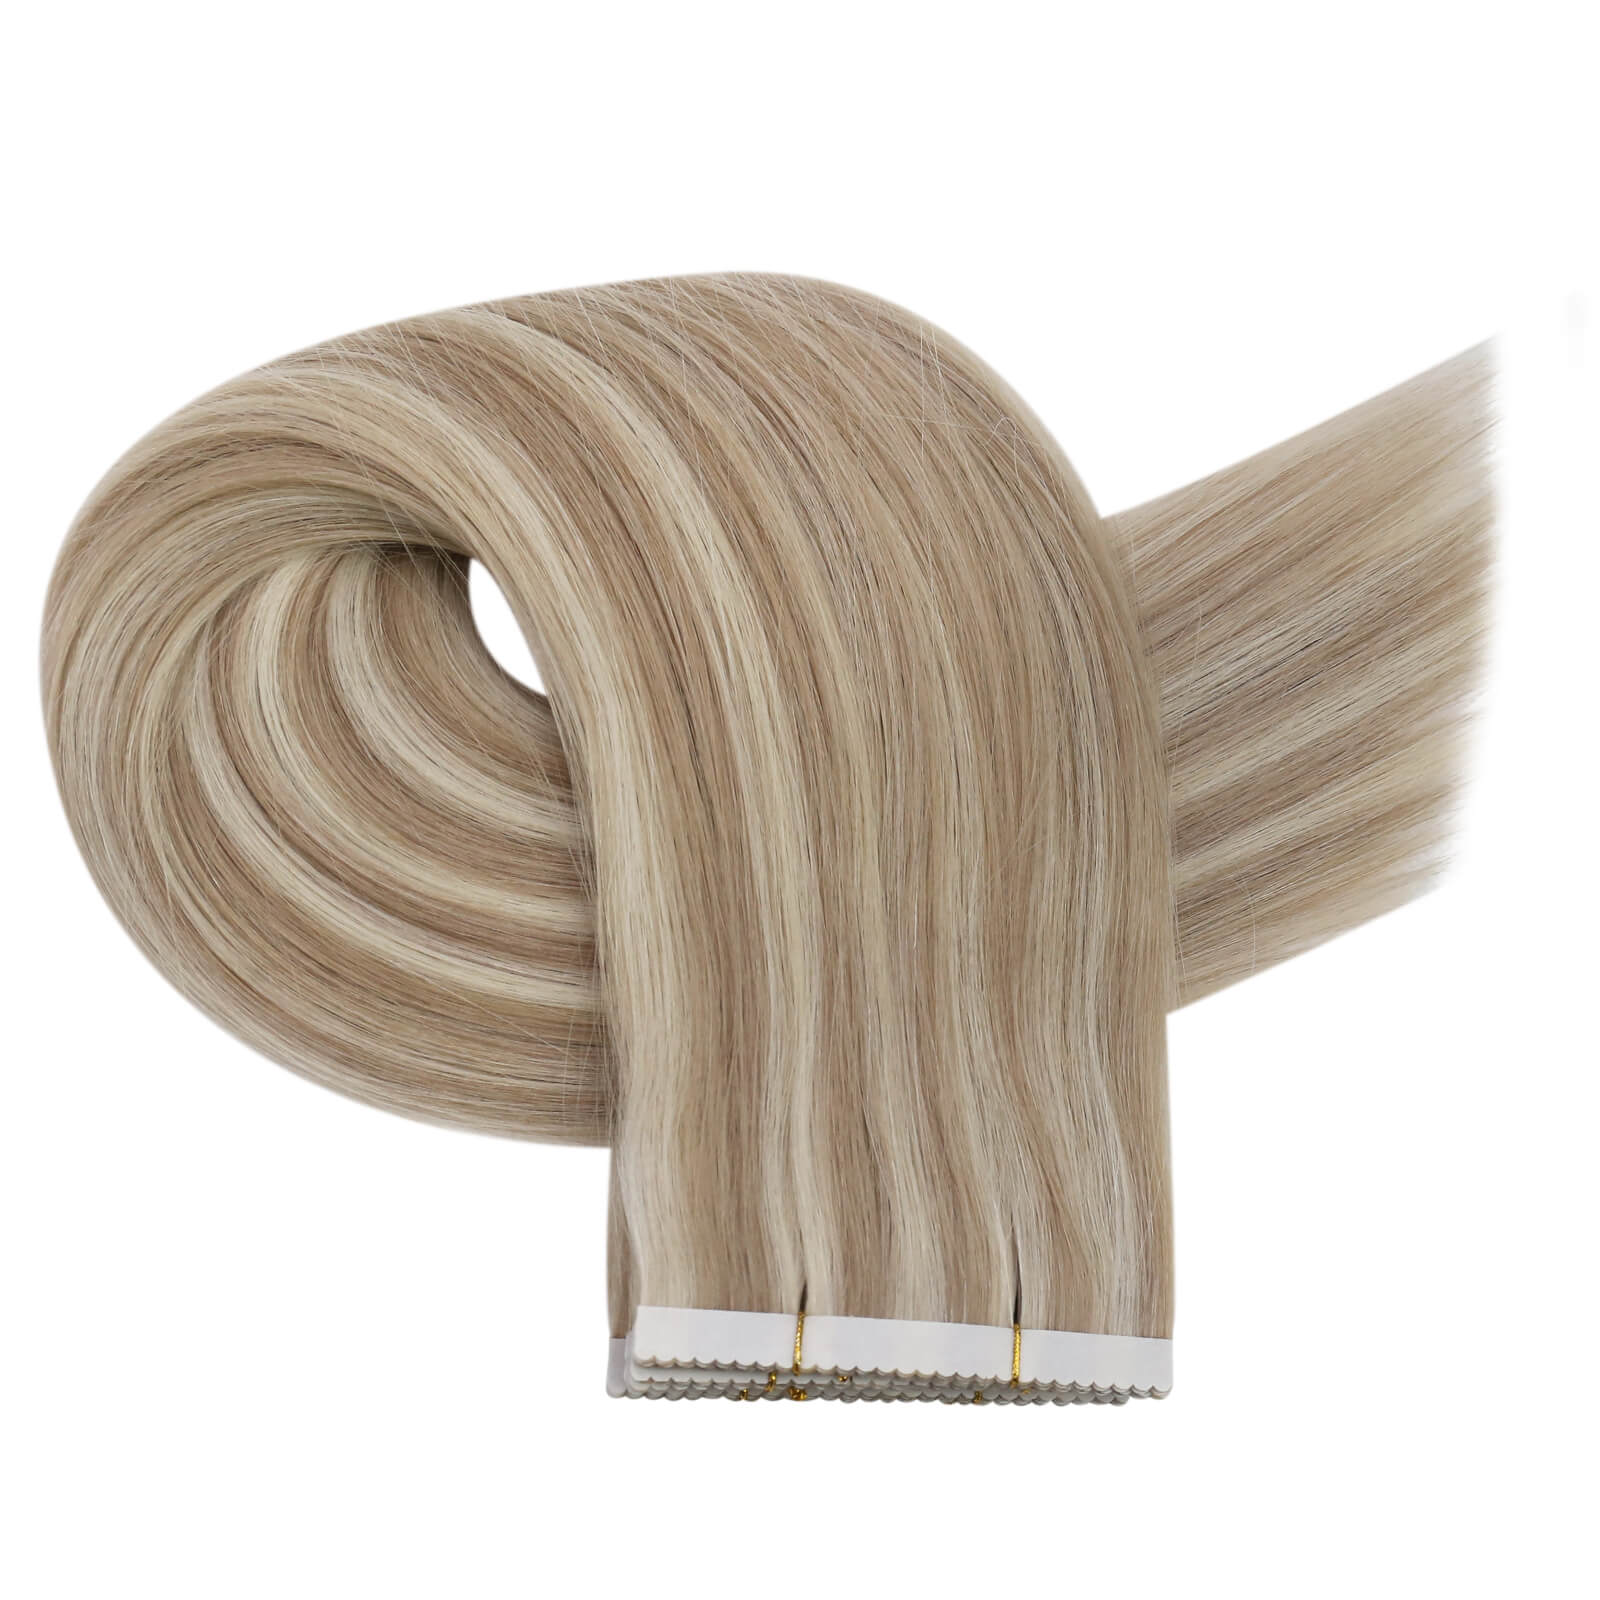 blonde tape in hair extensions real human hair